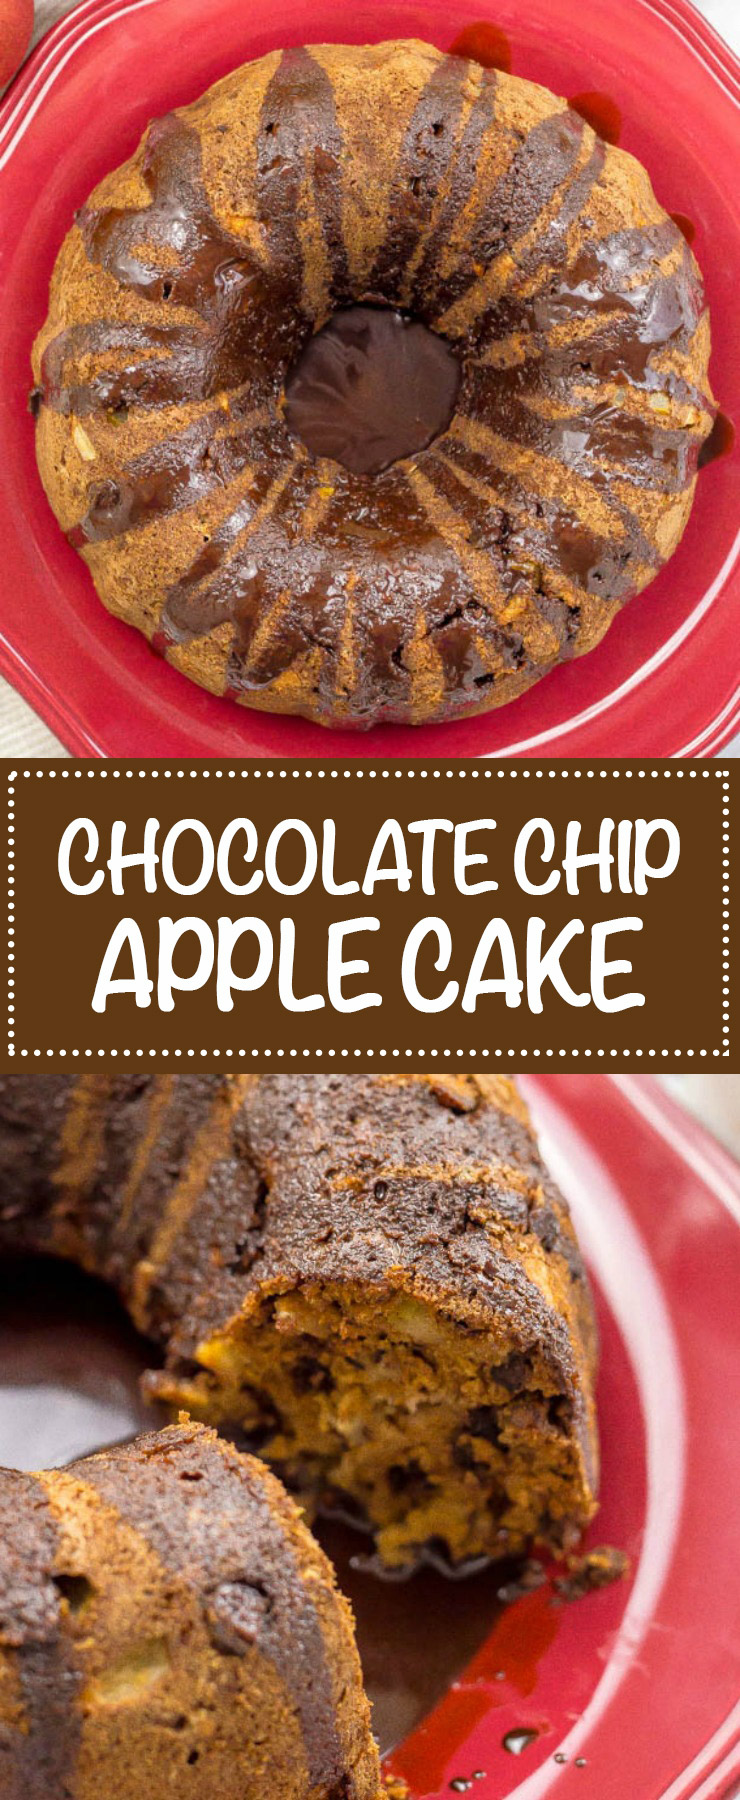 Chocolate chip apple cake is loaded with sweet apple chunks, chocolate chips and walnuts for a delicious fall dessert! #applecake #chocolatecake #cake #dessert #falldesserts